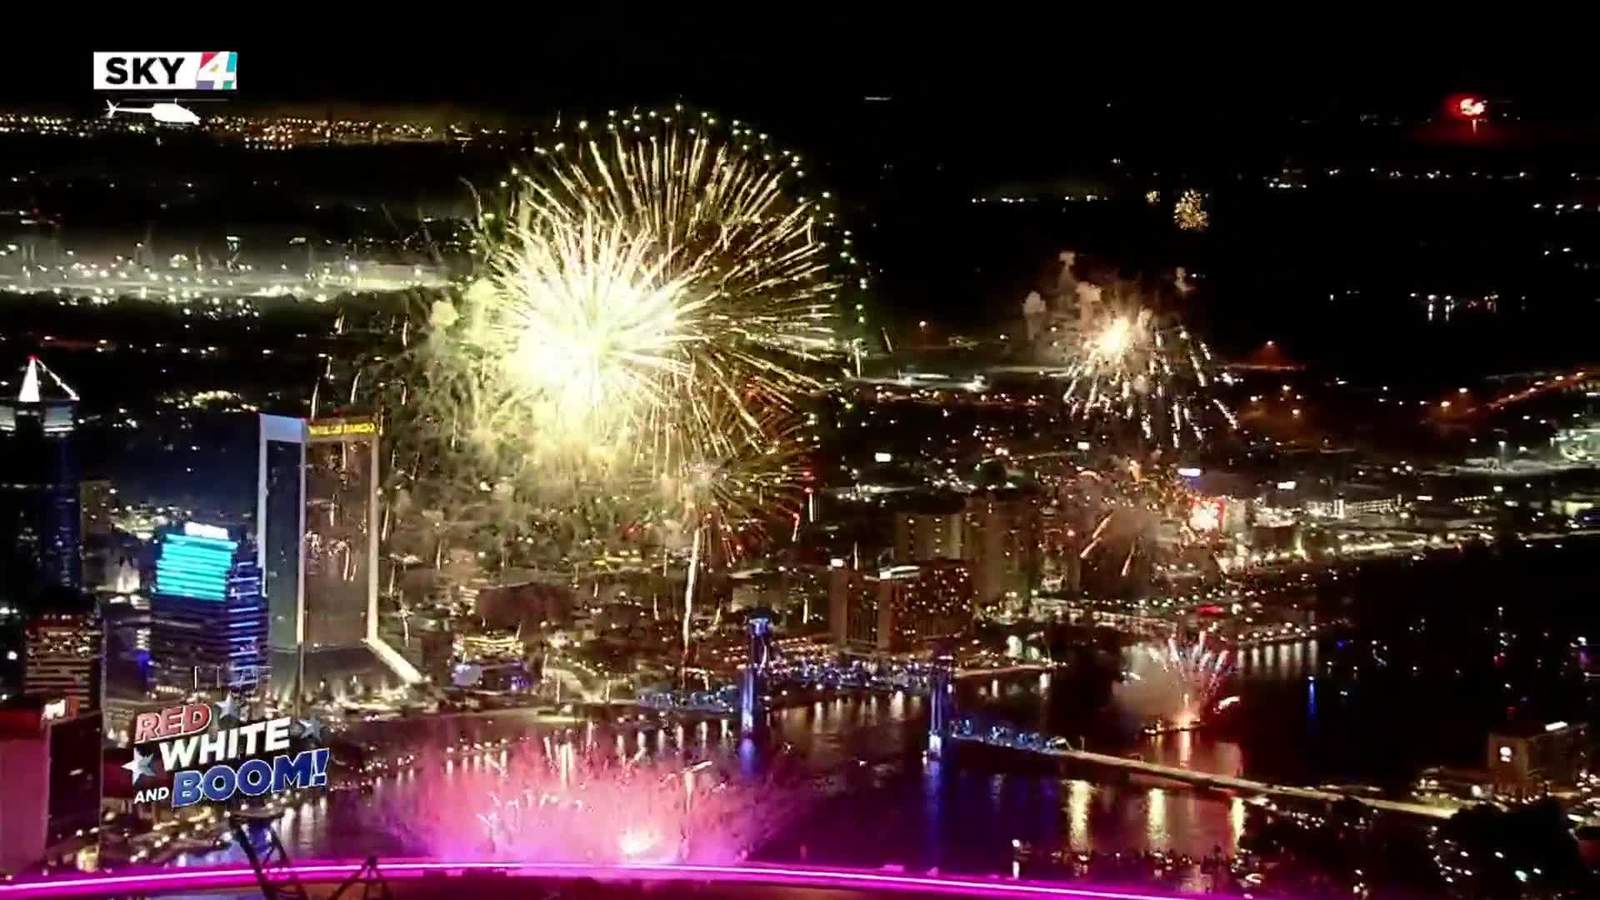 WATCH IT AGAIN: Jacksonville Fireworks Spectacular 2020